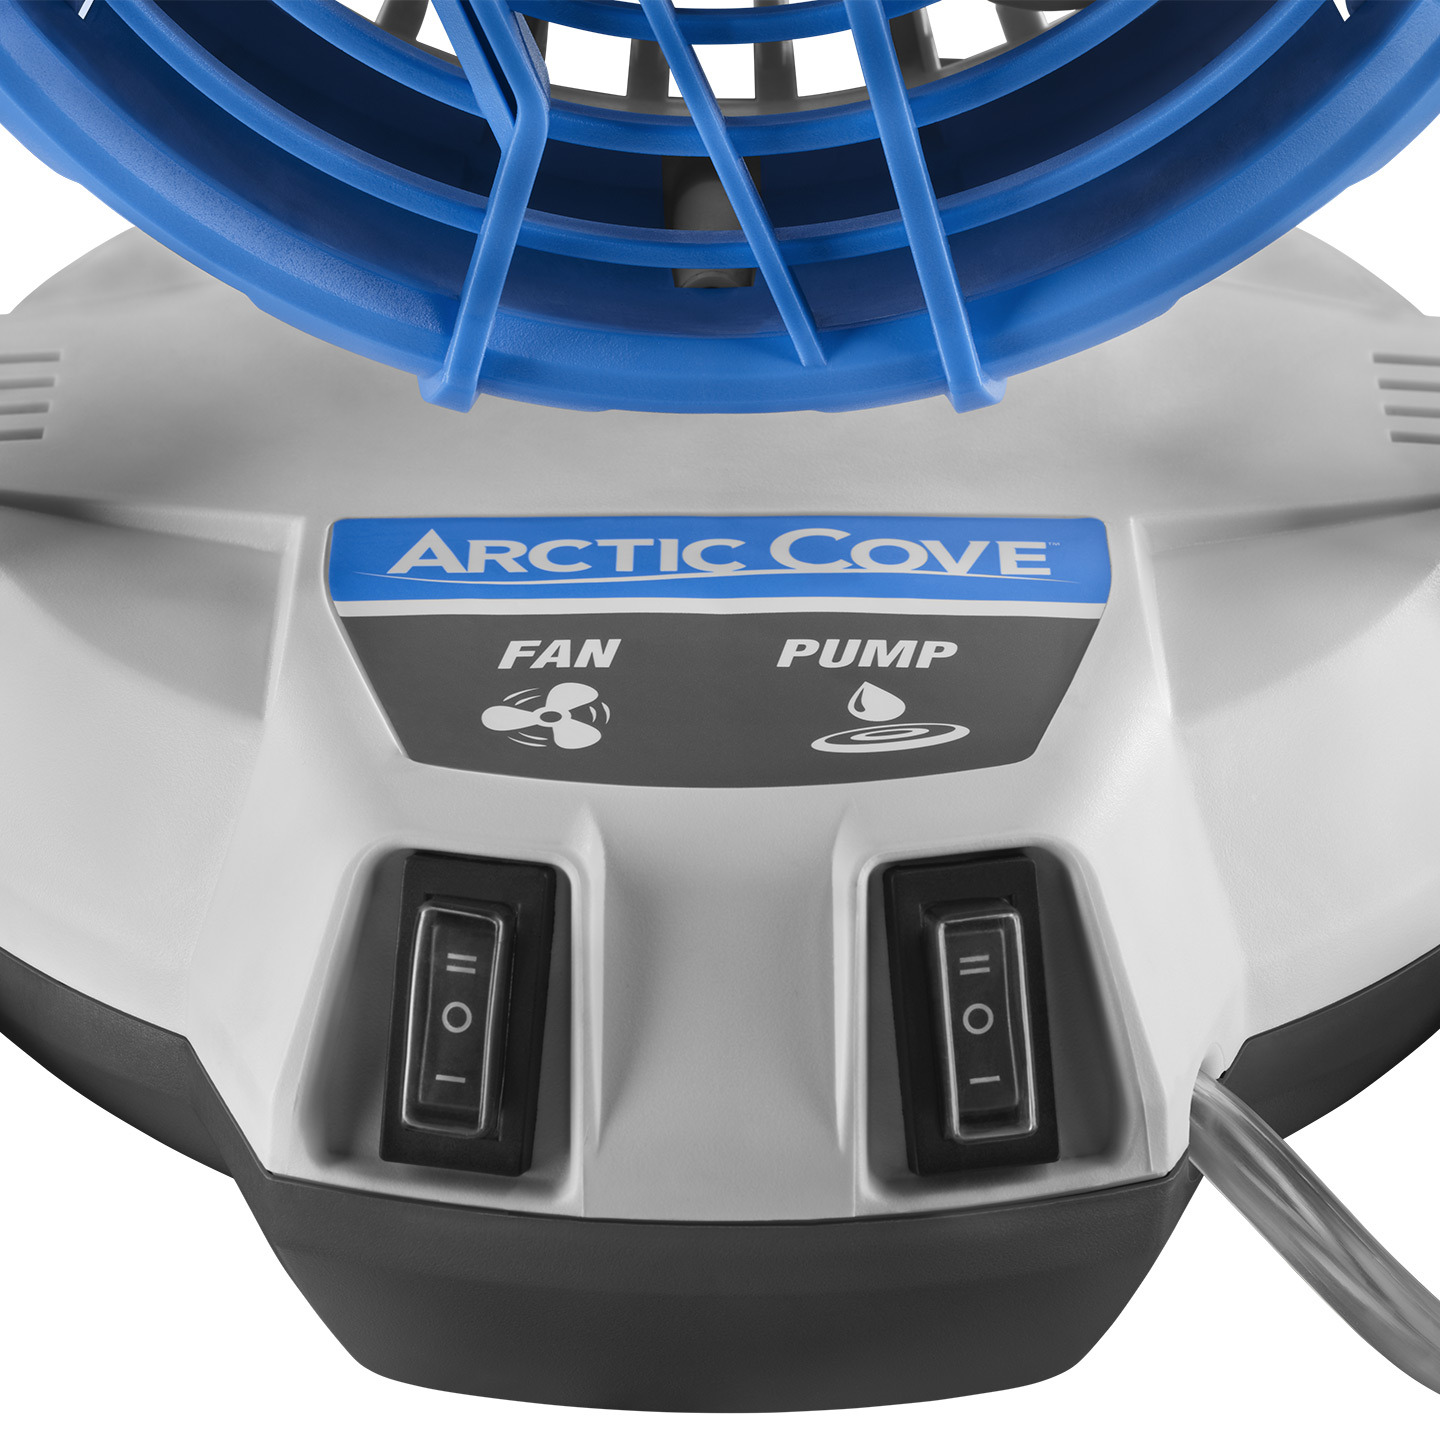 18V Bucket Top Misting Fan ‹ Products ‹ Arctic Cove